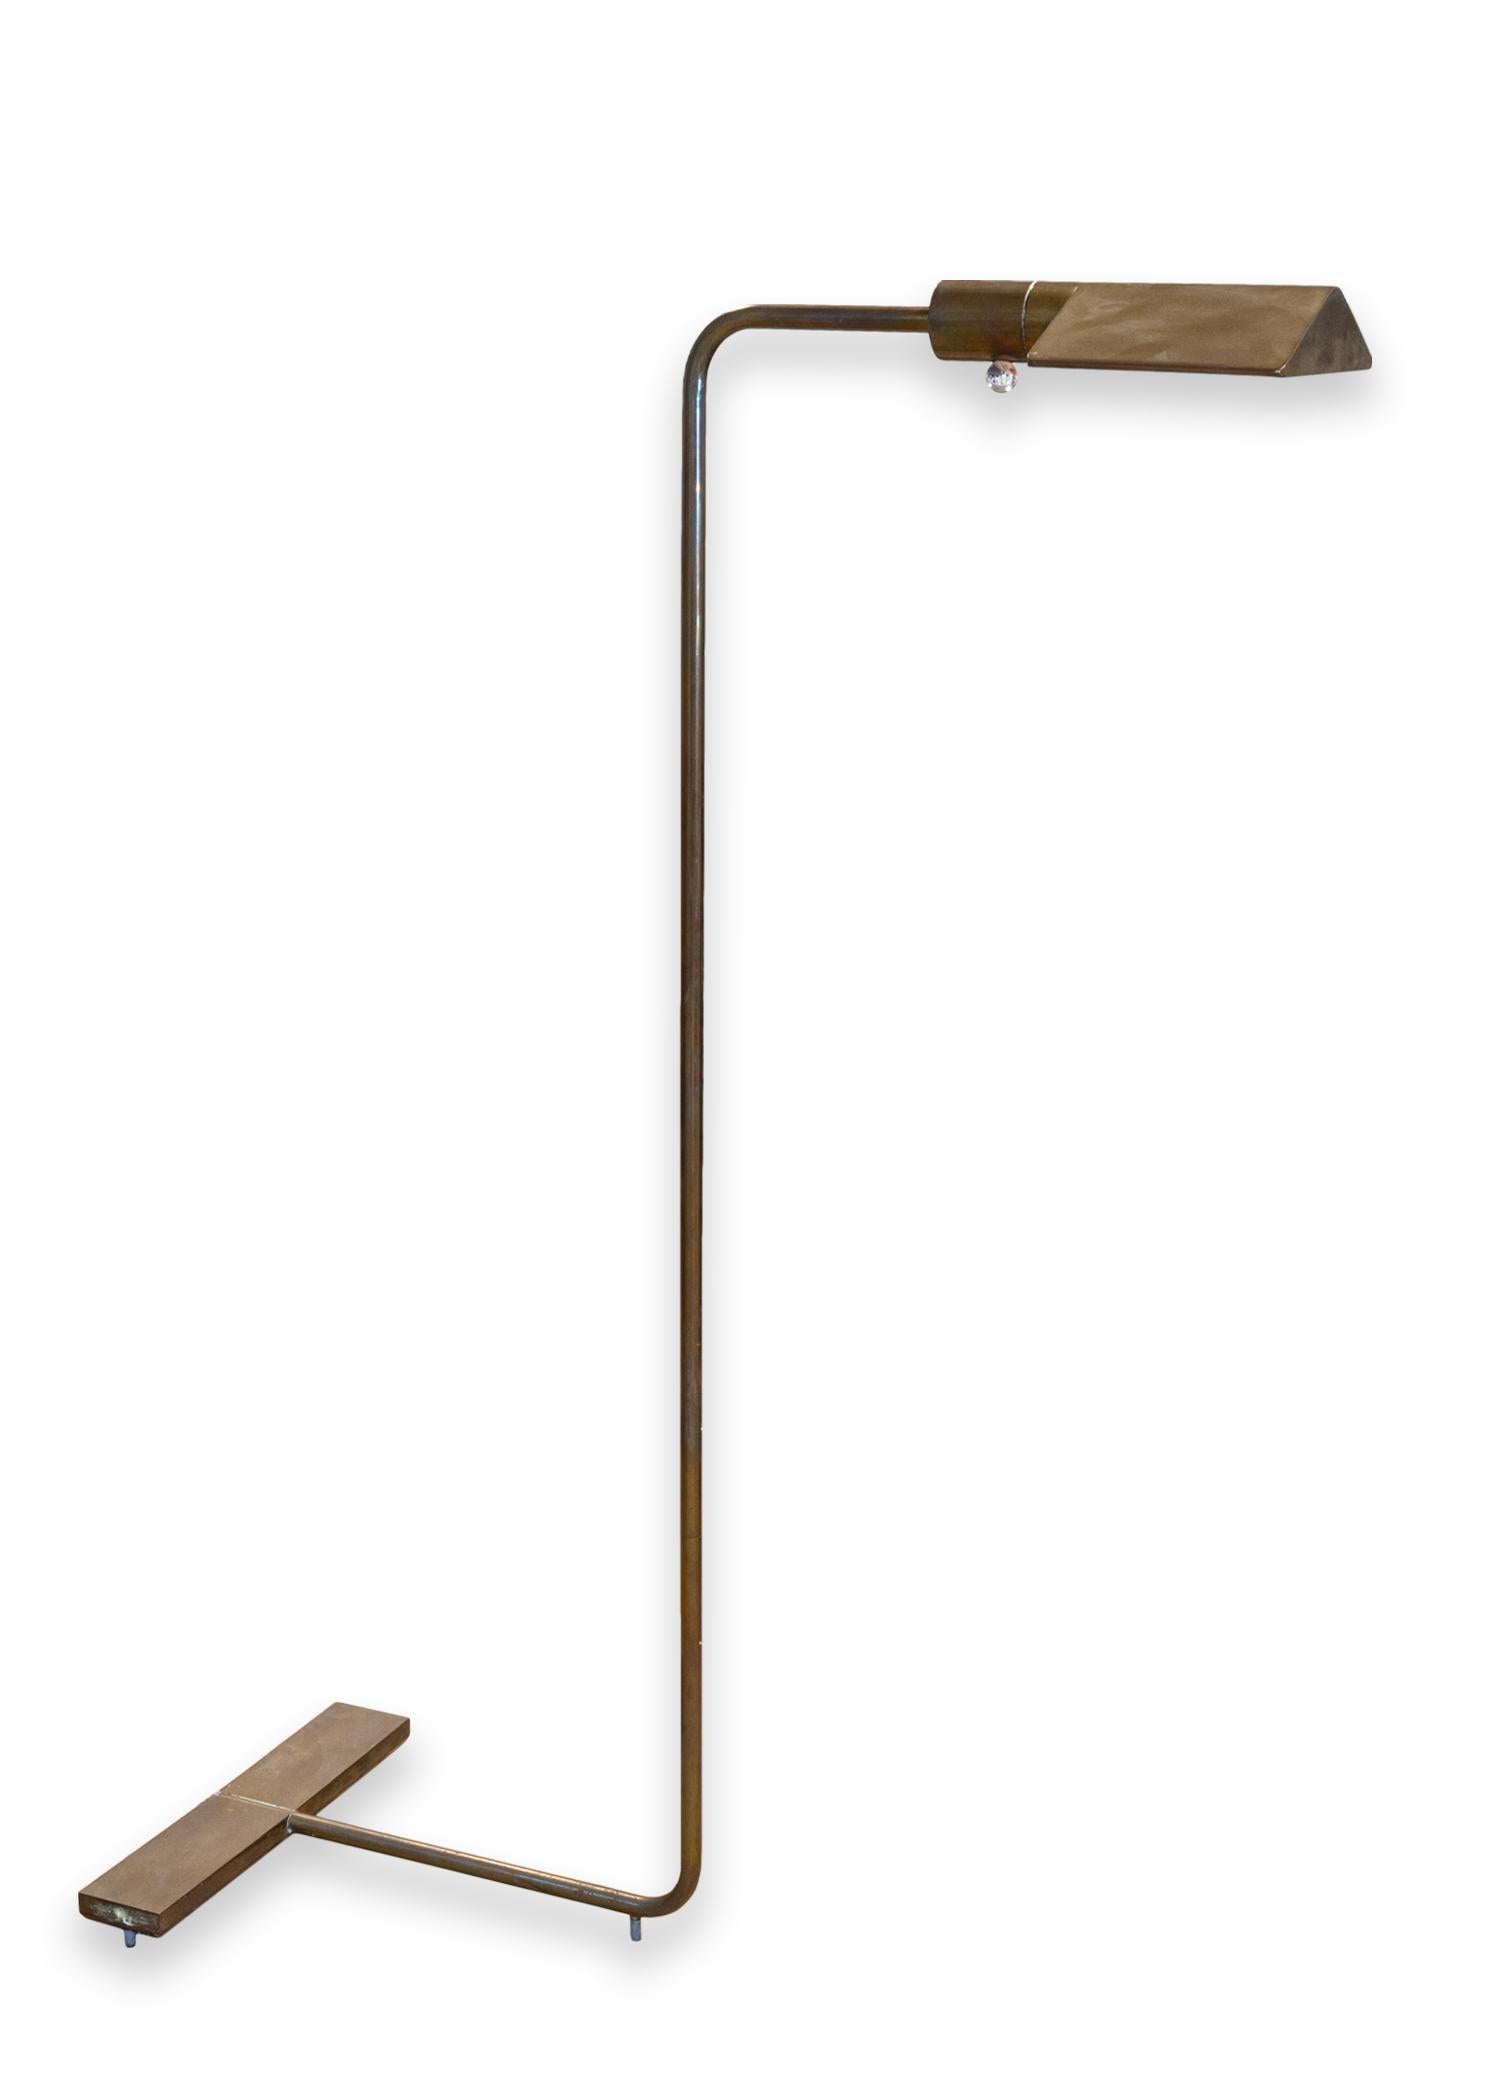 A Cedric Hartman signed floor lamp. A beautiful floor lamp featuring a full polished brass construction with wonderful patina. This lamp is full adjustable from the center pole, the lamp shade, and the dimming of the light to fully fit your space